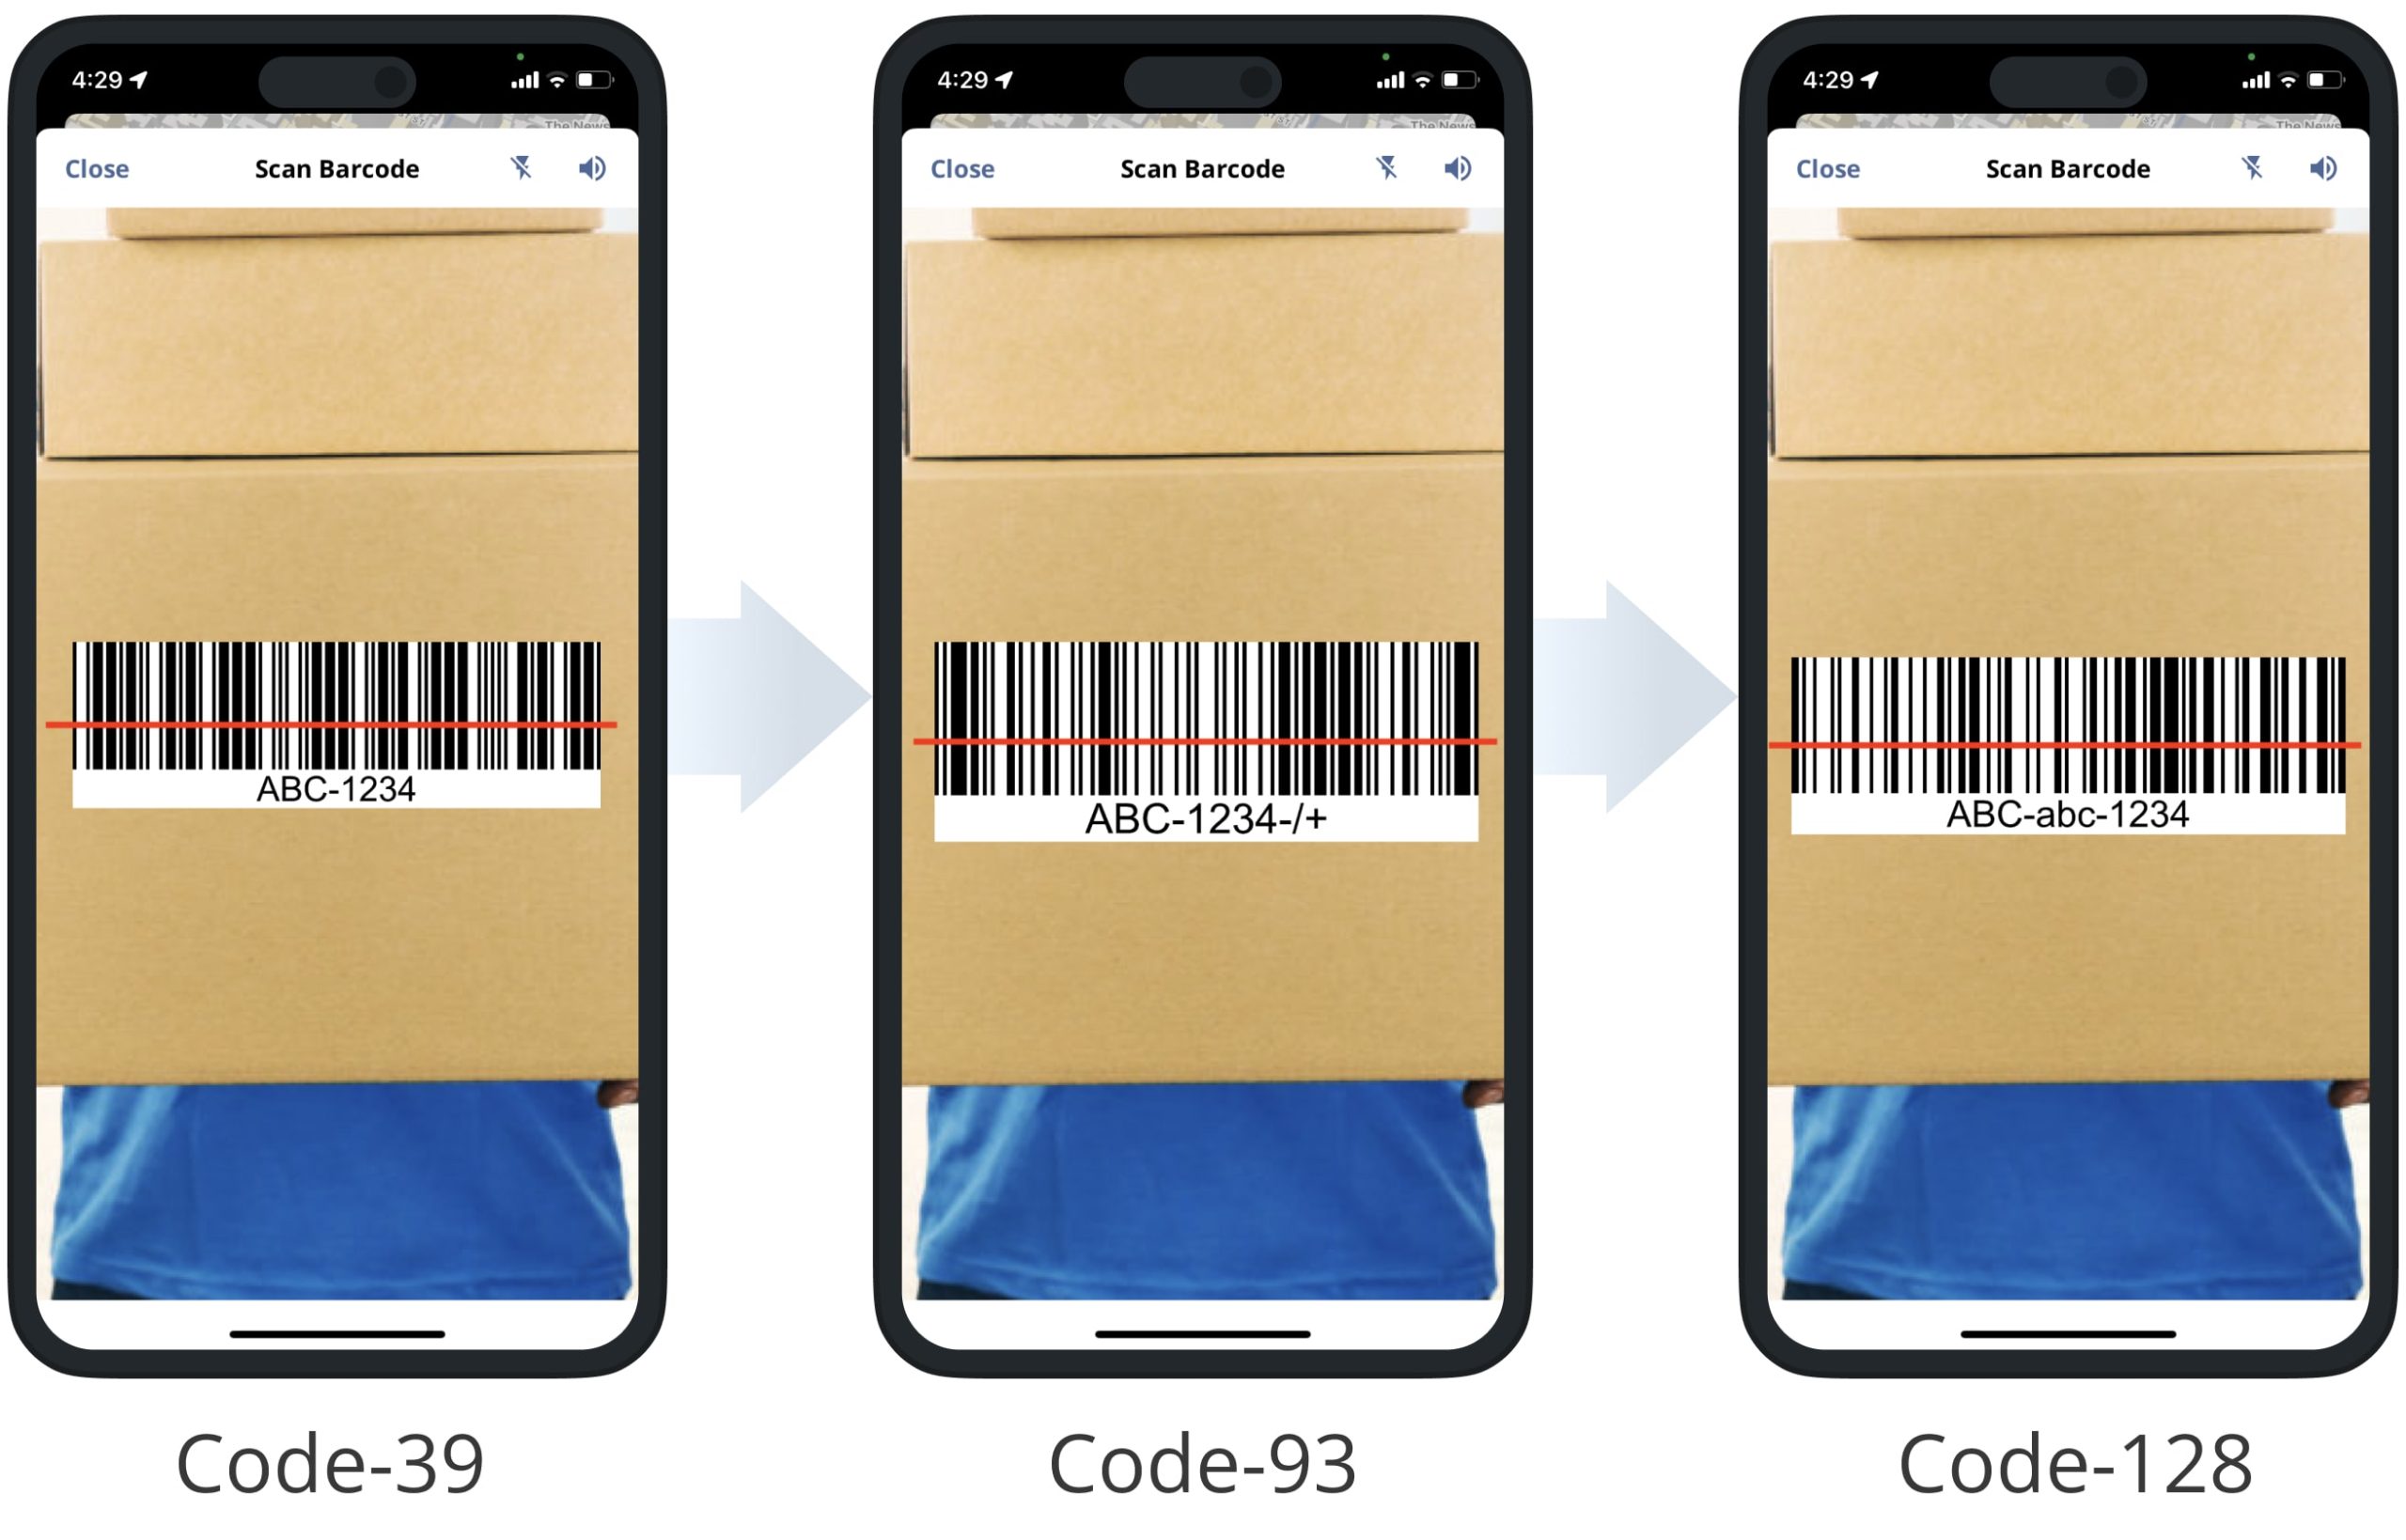 Scan Code-39, Code-93, and Code-128 barcodes using Route4Me's iOS Mobile Route Planner in-app barcode scanner.